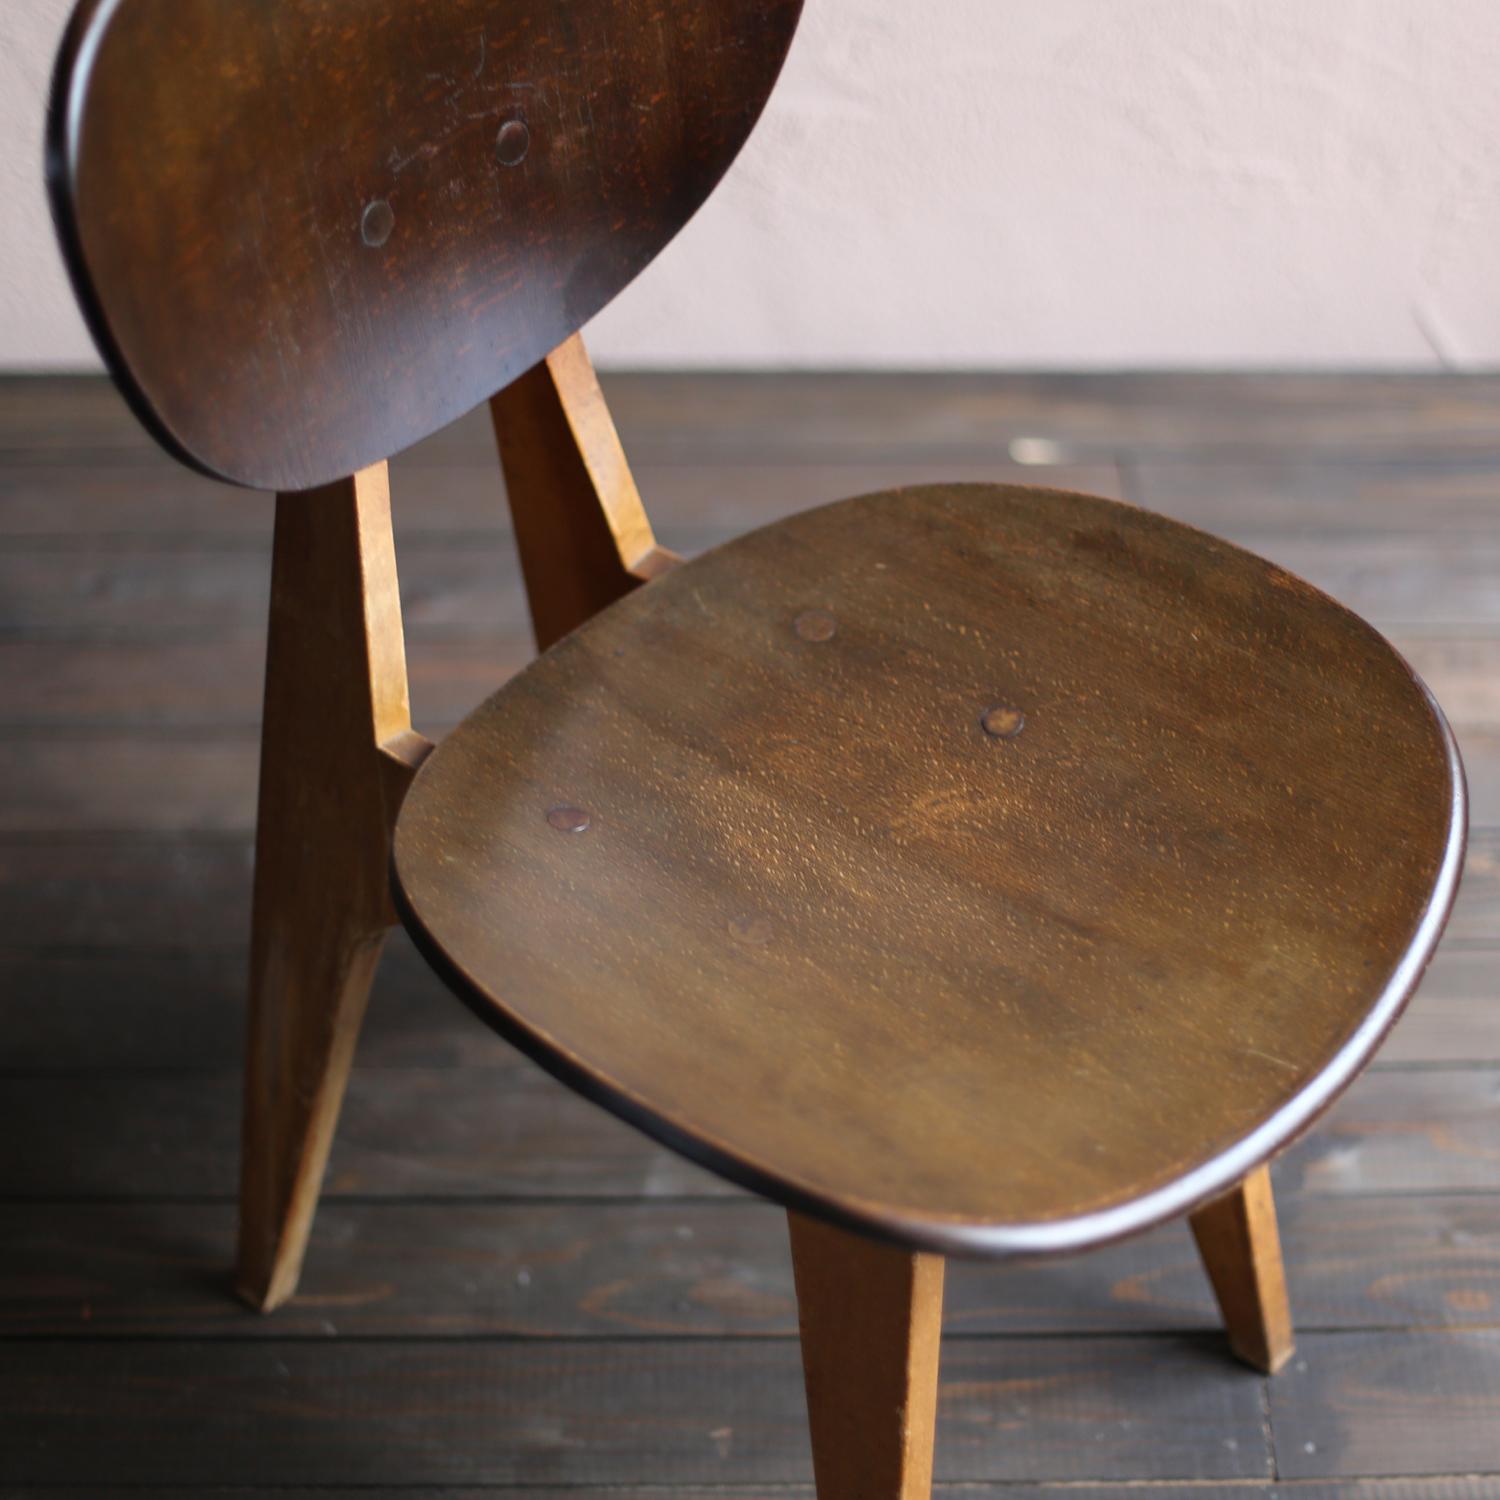 It is a dining chair designed by Junzo Sakakura Architectural Institute called 